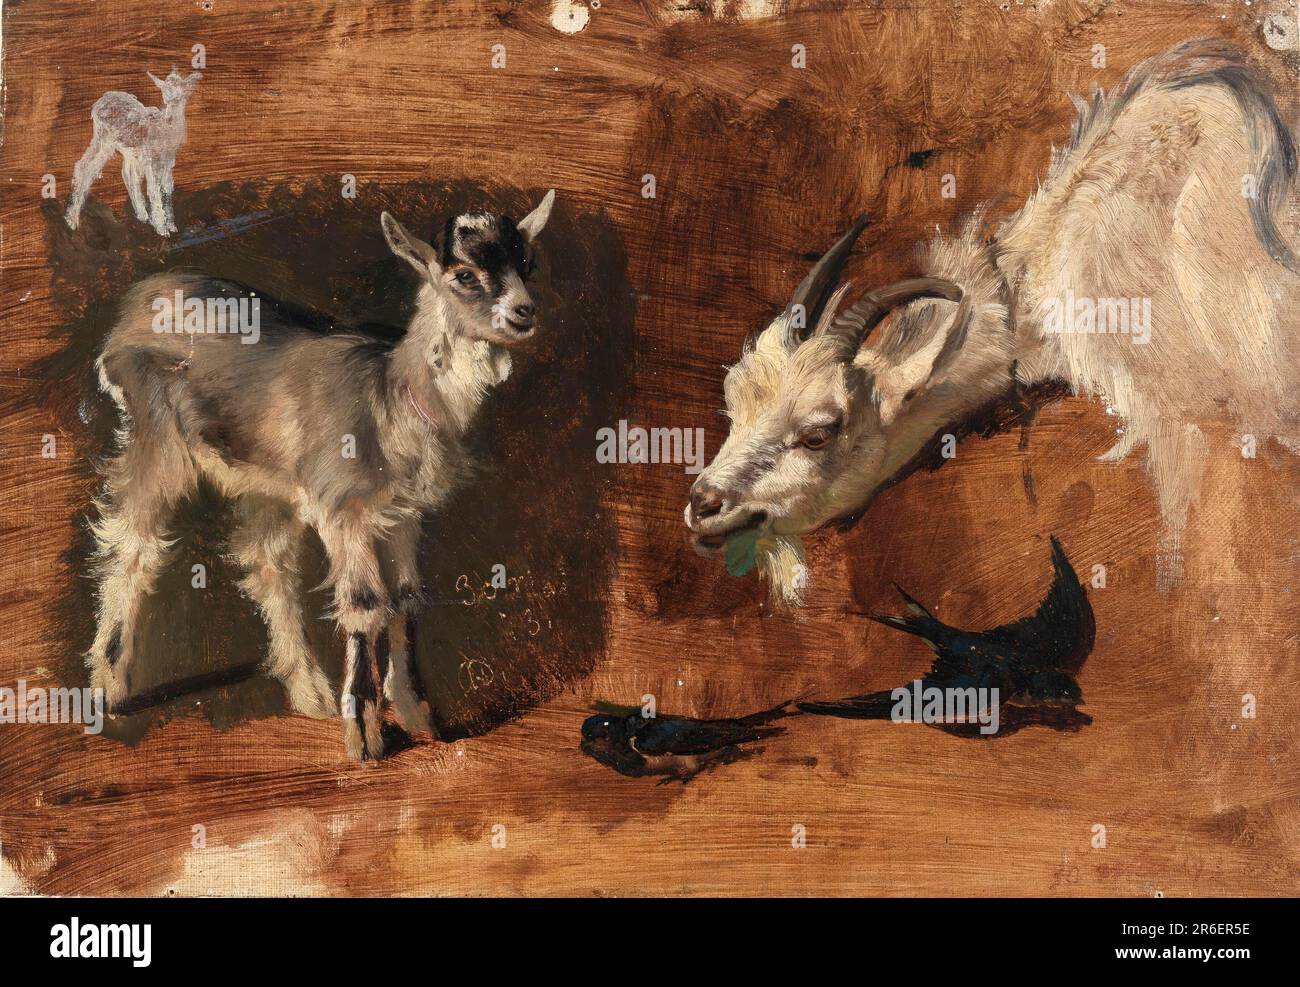 Goats. Date: n.d. oil on canvas. Museum: Smithsonian American Art Museum. Stock Photo